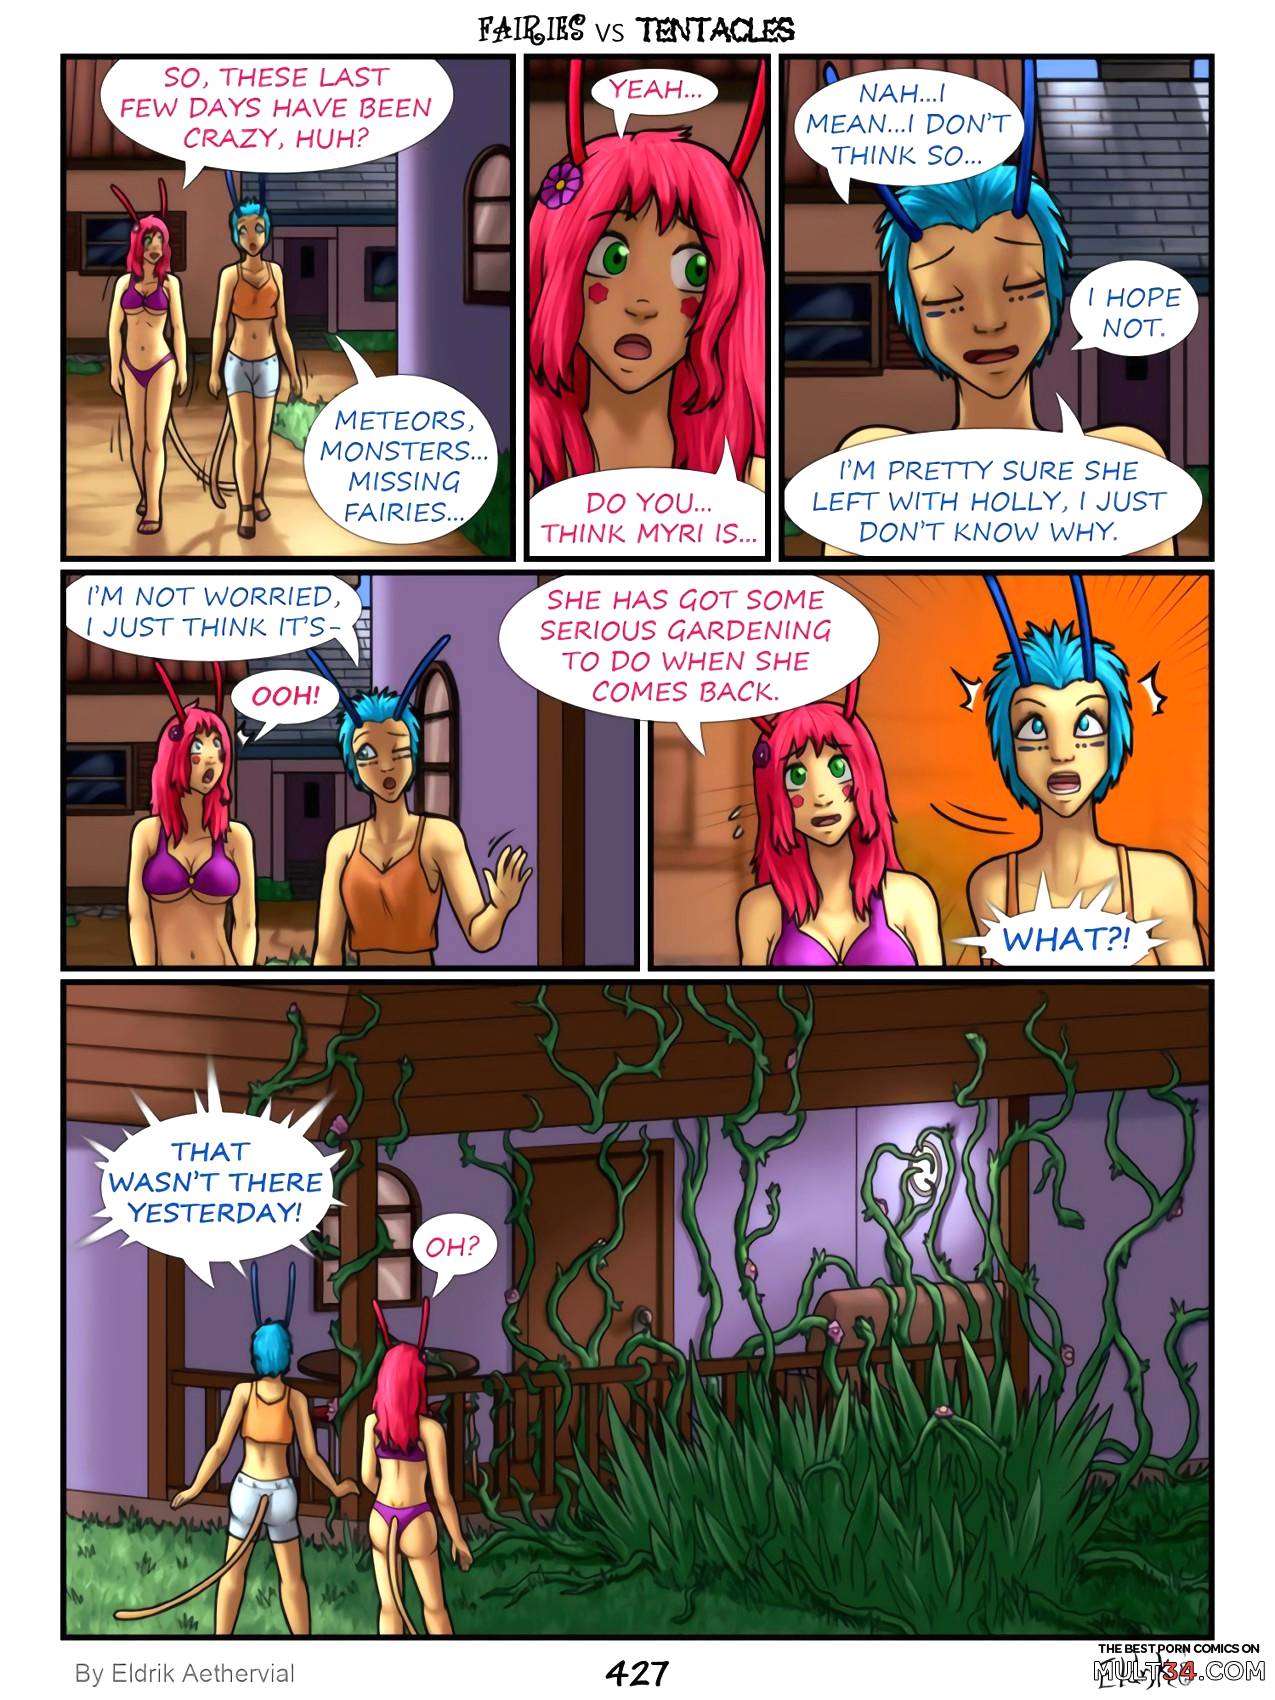 Fairies vs Tentacles 6-9 page 8